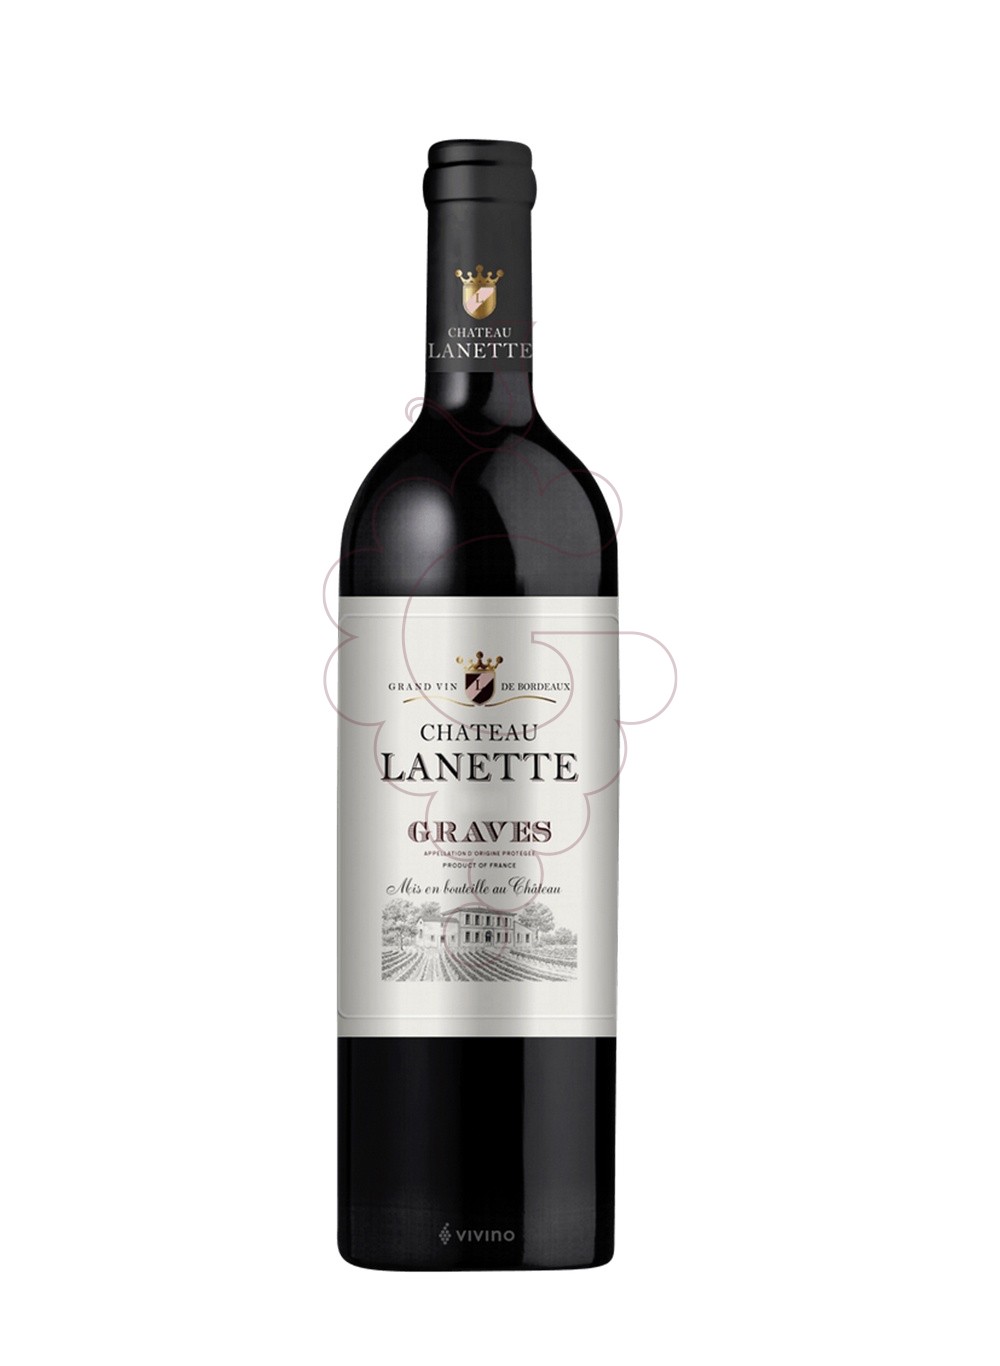 Photo Ch. lanette graves negre 2016 red wine